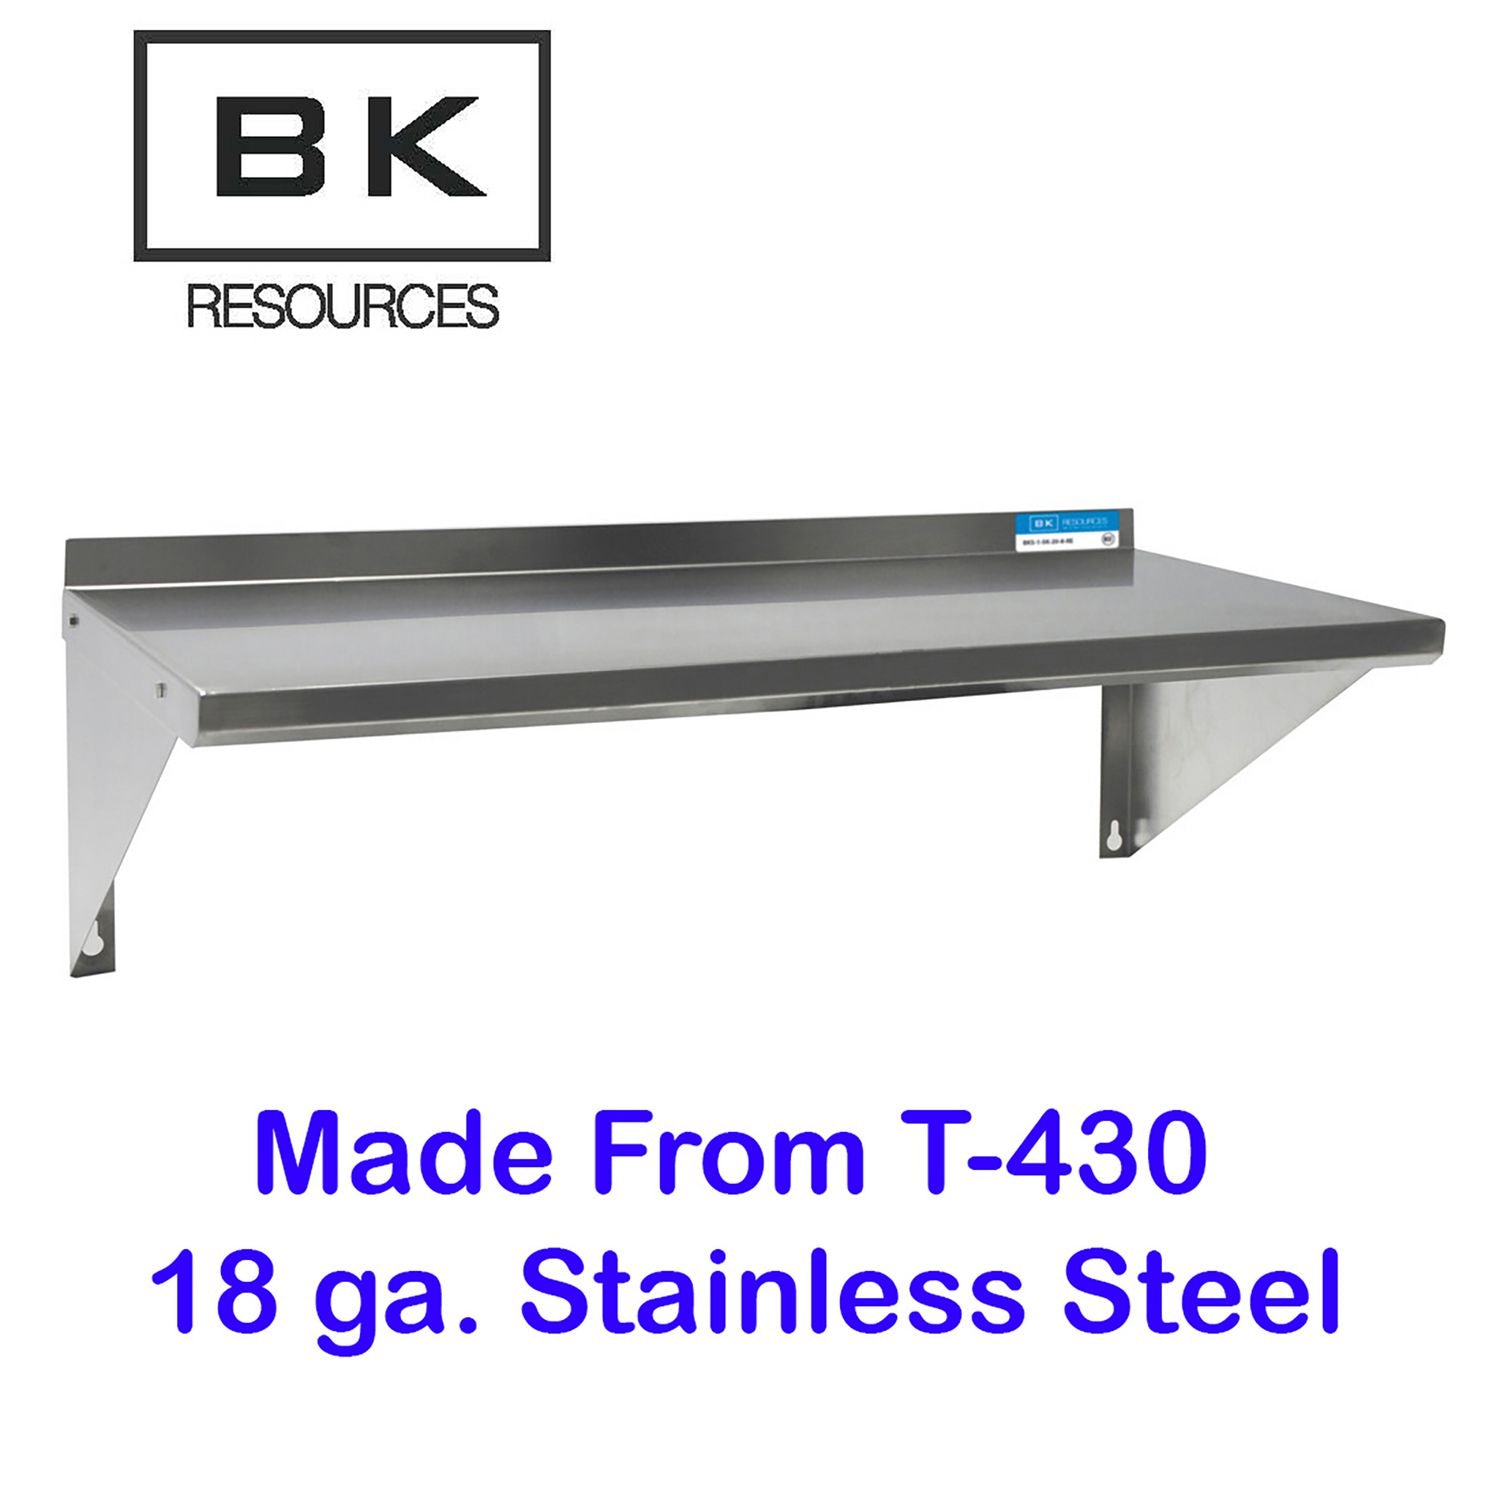 stainless-steel-economy-overshelf-24w-x-16d-x-115h-stainless-steel-silver-2-pallet-ships-in-4-6-business-days_bke2wse1624 - 3